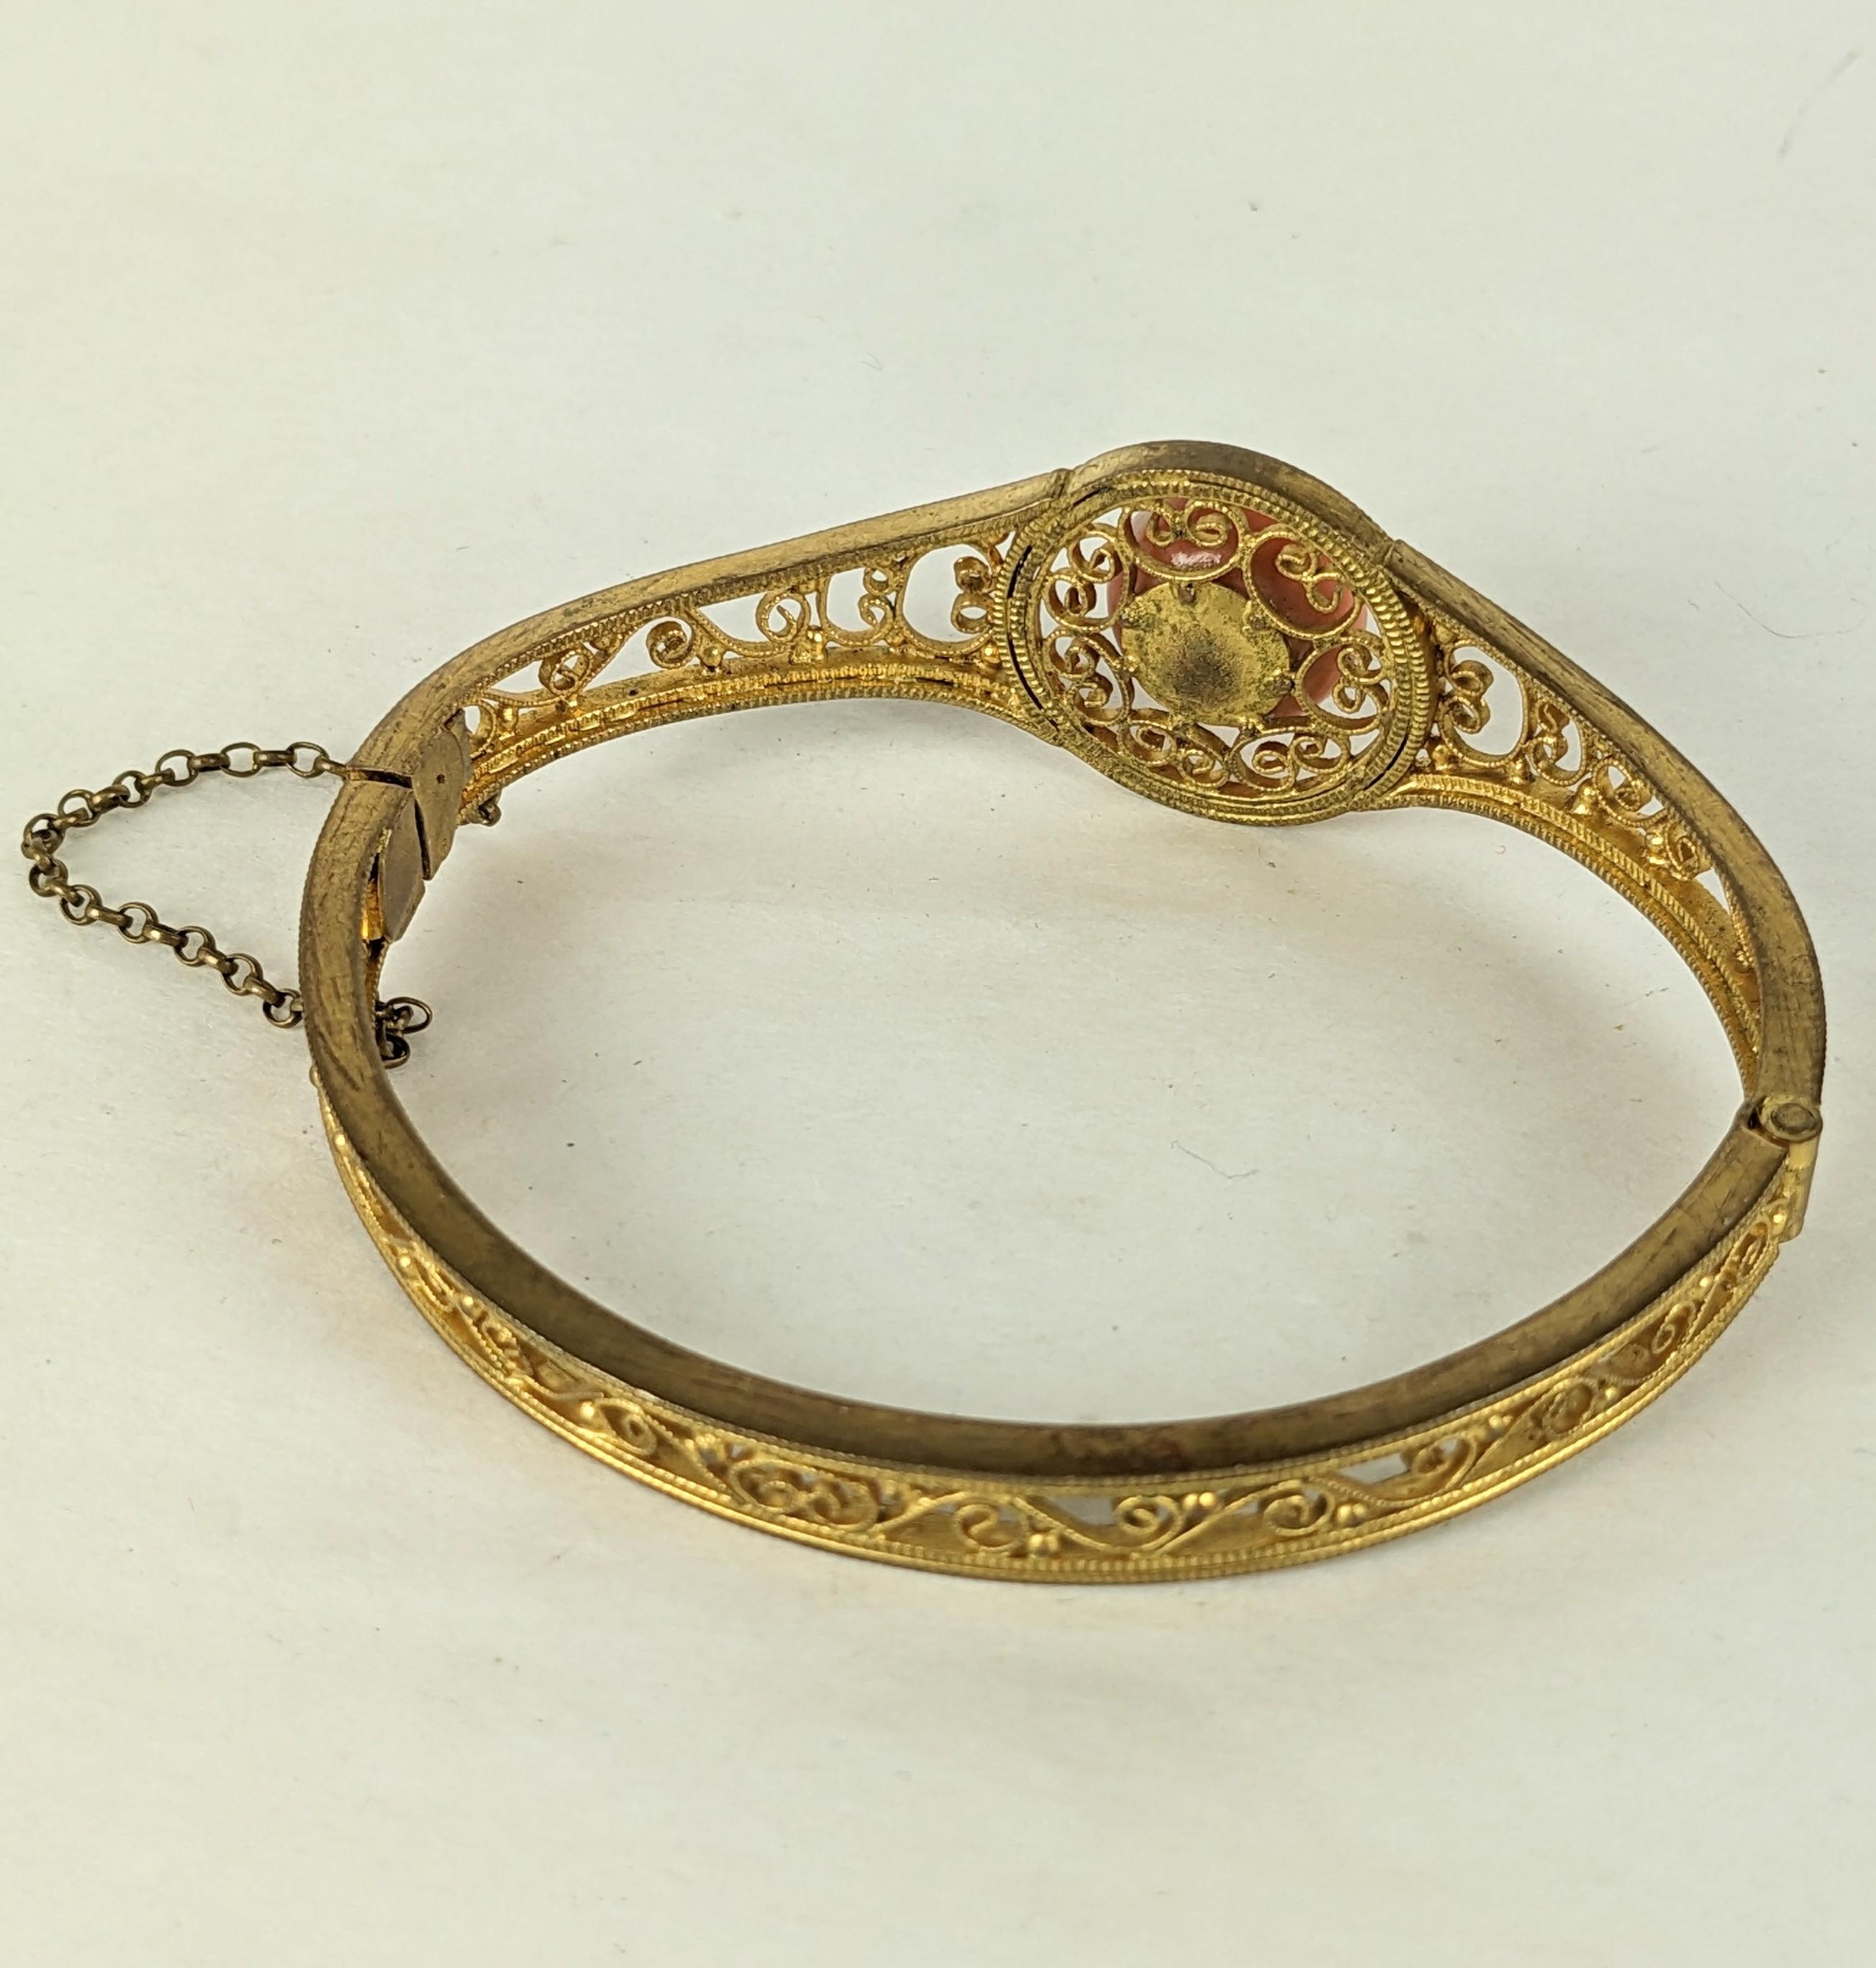 Unusual Etruscan Scrollwork Coral Bangle In Good Condition For Sale In New York, NY